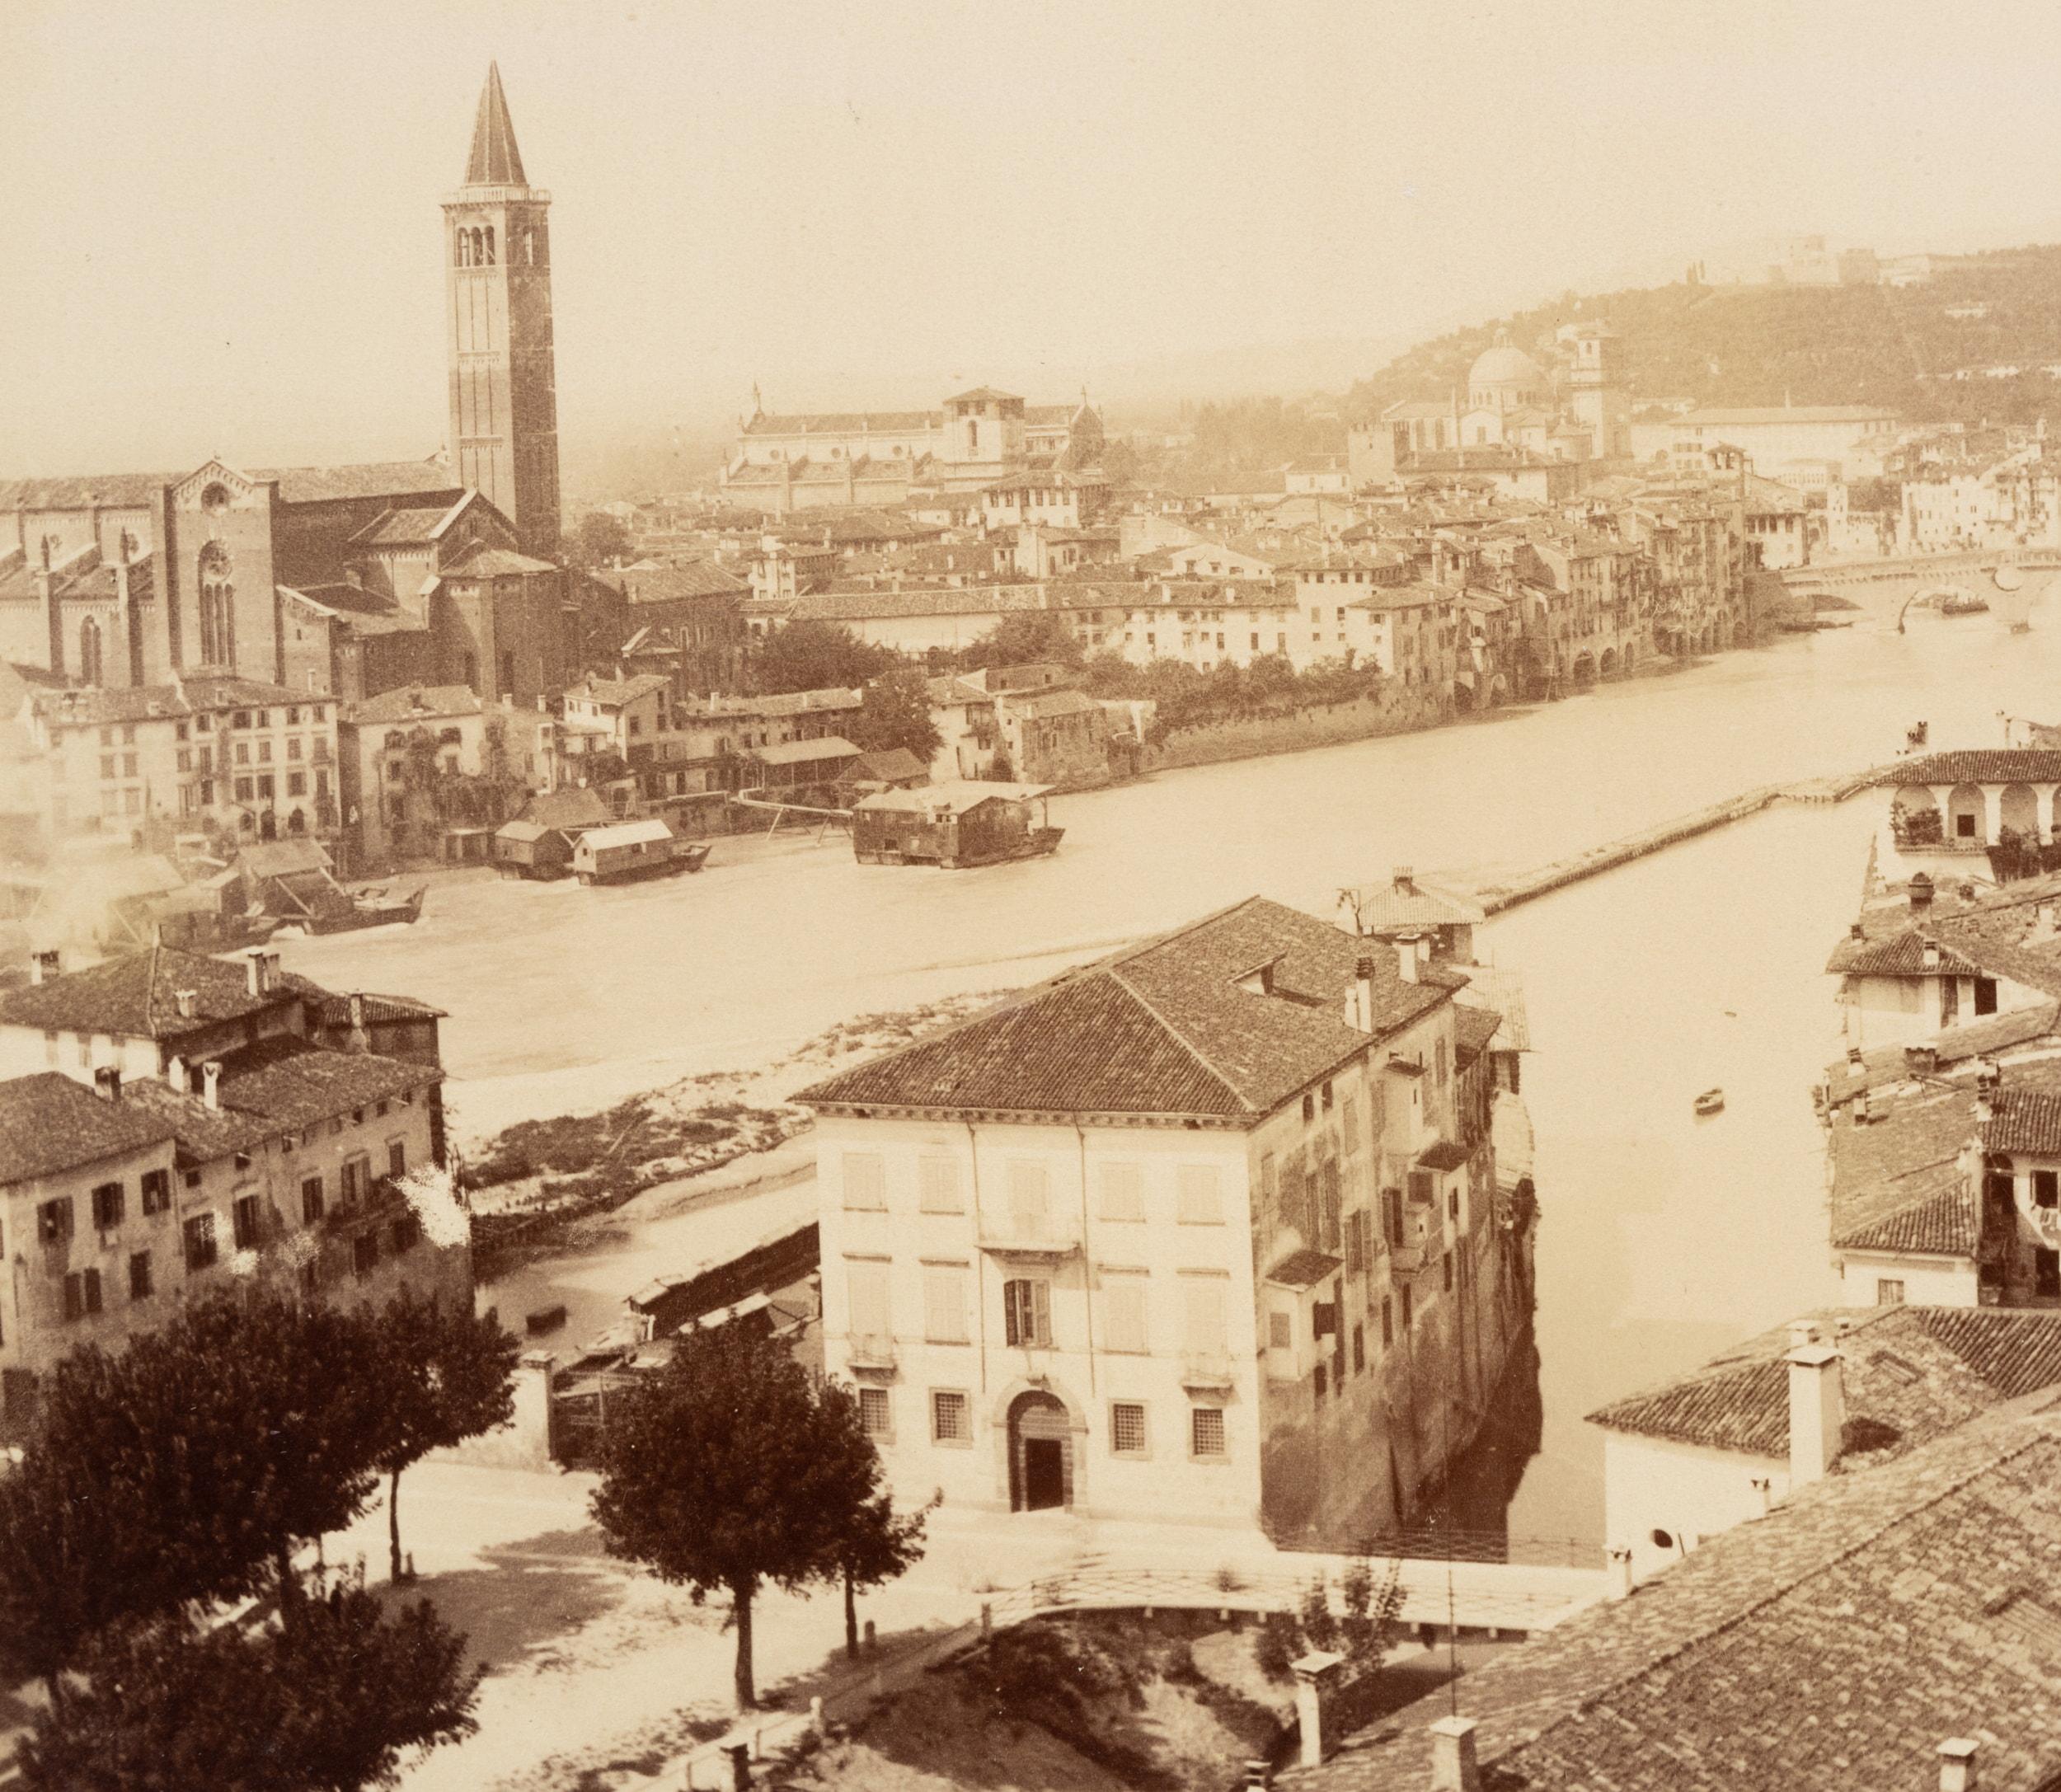 V. Florianello (19th century): Verona panorama with view over the Adige with the Campanile of Sant'Anastasia standing out prominently on the left bank, c. 1880, albumen paper print

Technique: albumen paper print

Inscription: Lower right signed in